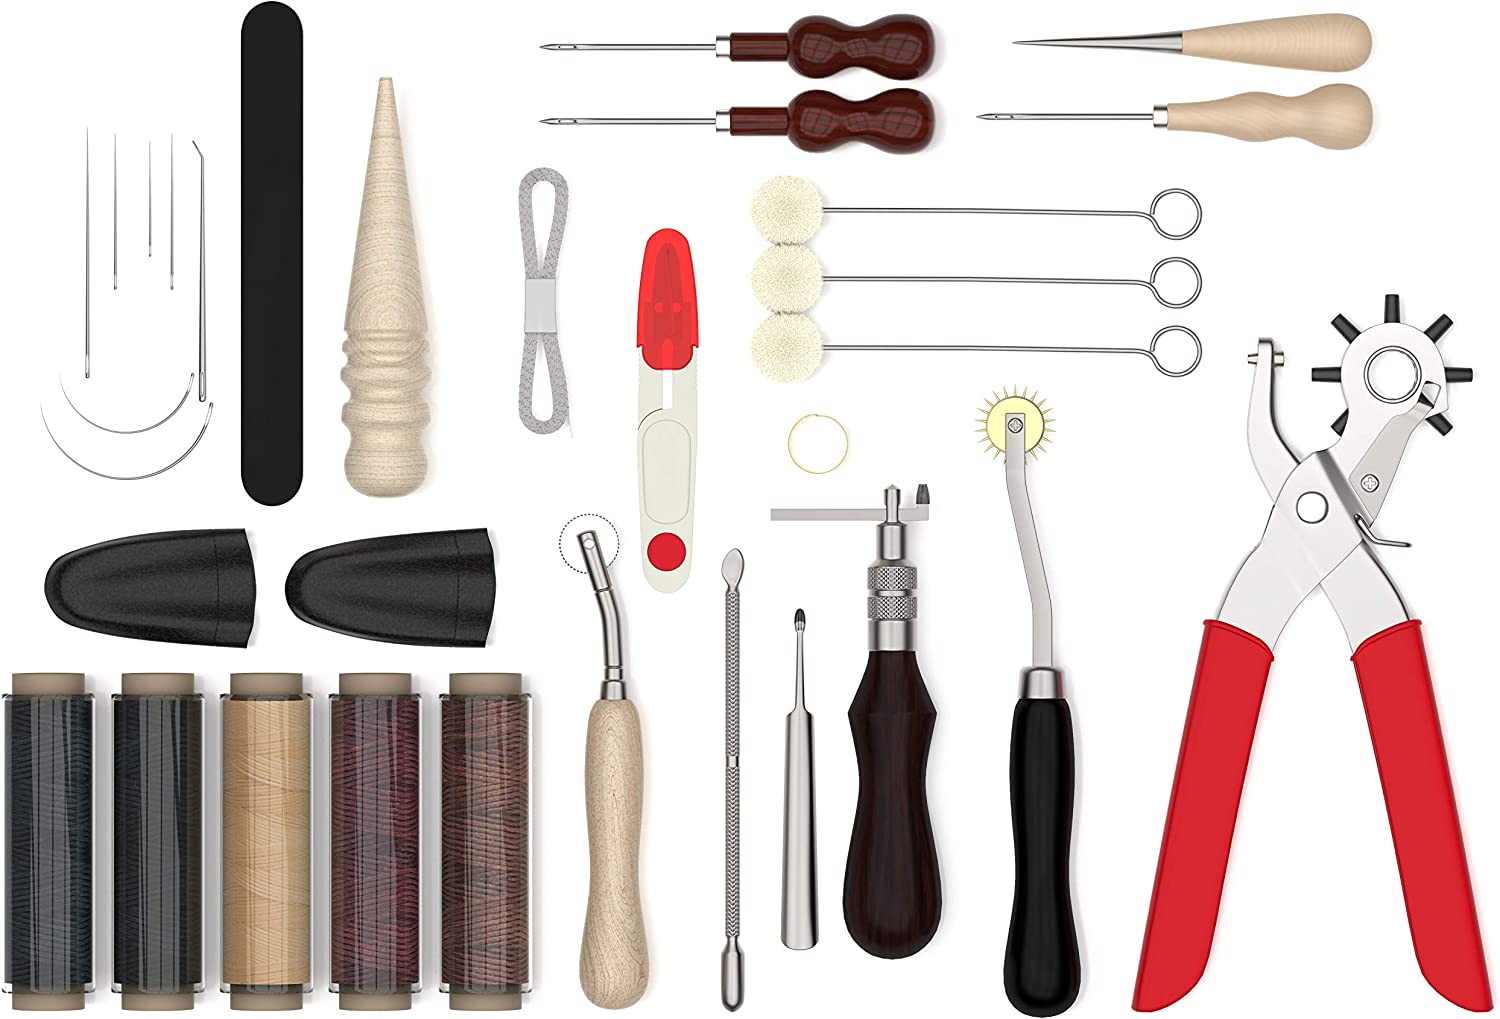 WHDZ 52pcs Leather Sewing Tools Kit